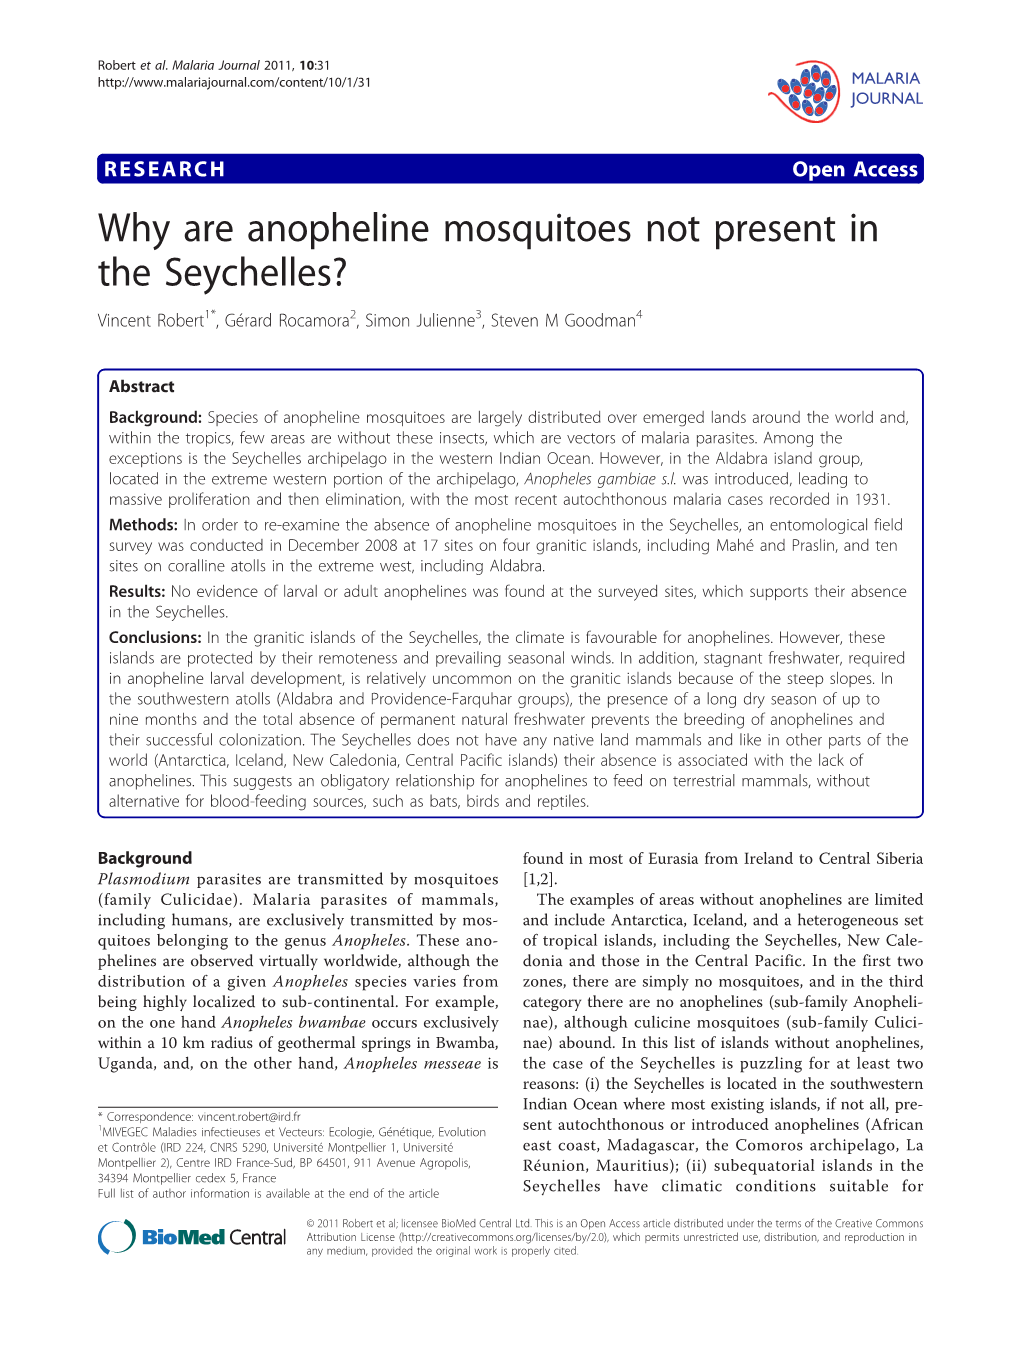 Why Are Anopheline Mosquitoes Not Present in the Seychelles? Vincent Robert1*, Gérard Rocamora2, Simon Julienne3, Steven M Goodman4